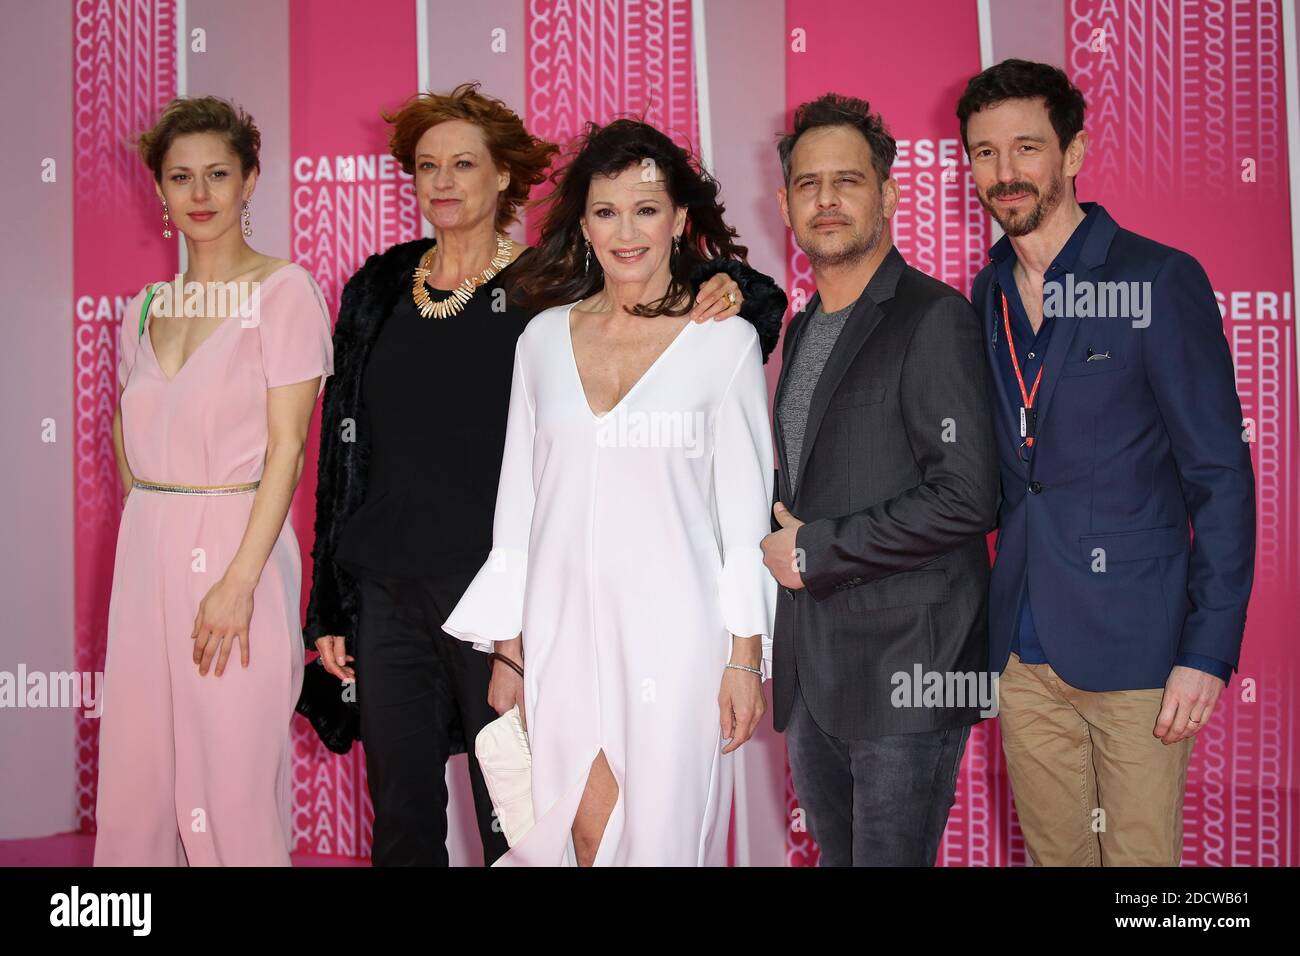 (l-r) Katharina Schlothauer, Nina Grosse, Iris Berben, Moritz Bleibtreu and Jan Ehlert attend 'Killing Eve' and 'When Heroes Fly' screening during the CanneSeries 2018 at the Palais du Festival in Cannes (France) , on april 8th, 2018. Photo by Marco Piovanotto/ABACAPRESS.COM Stock Photo